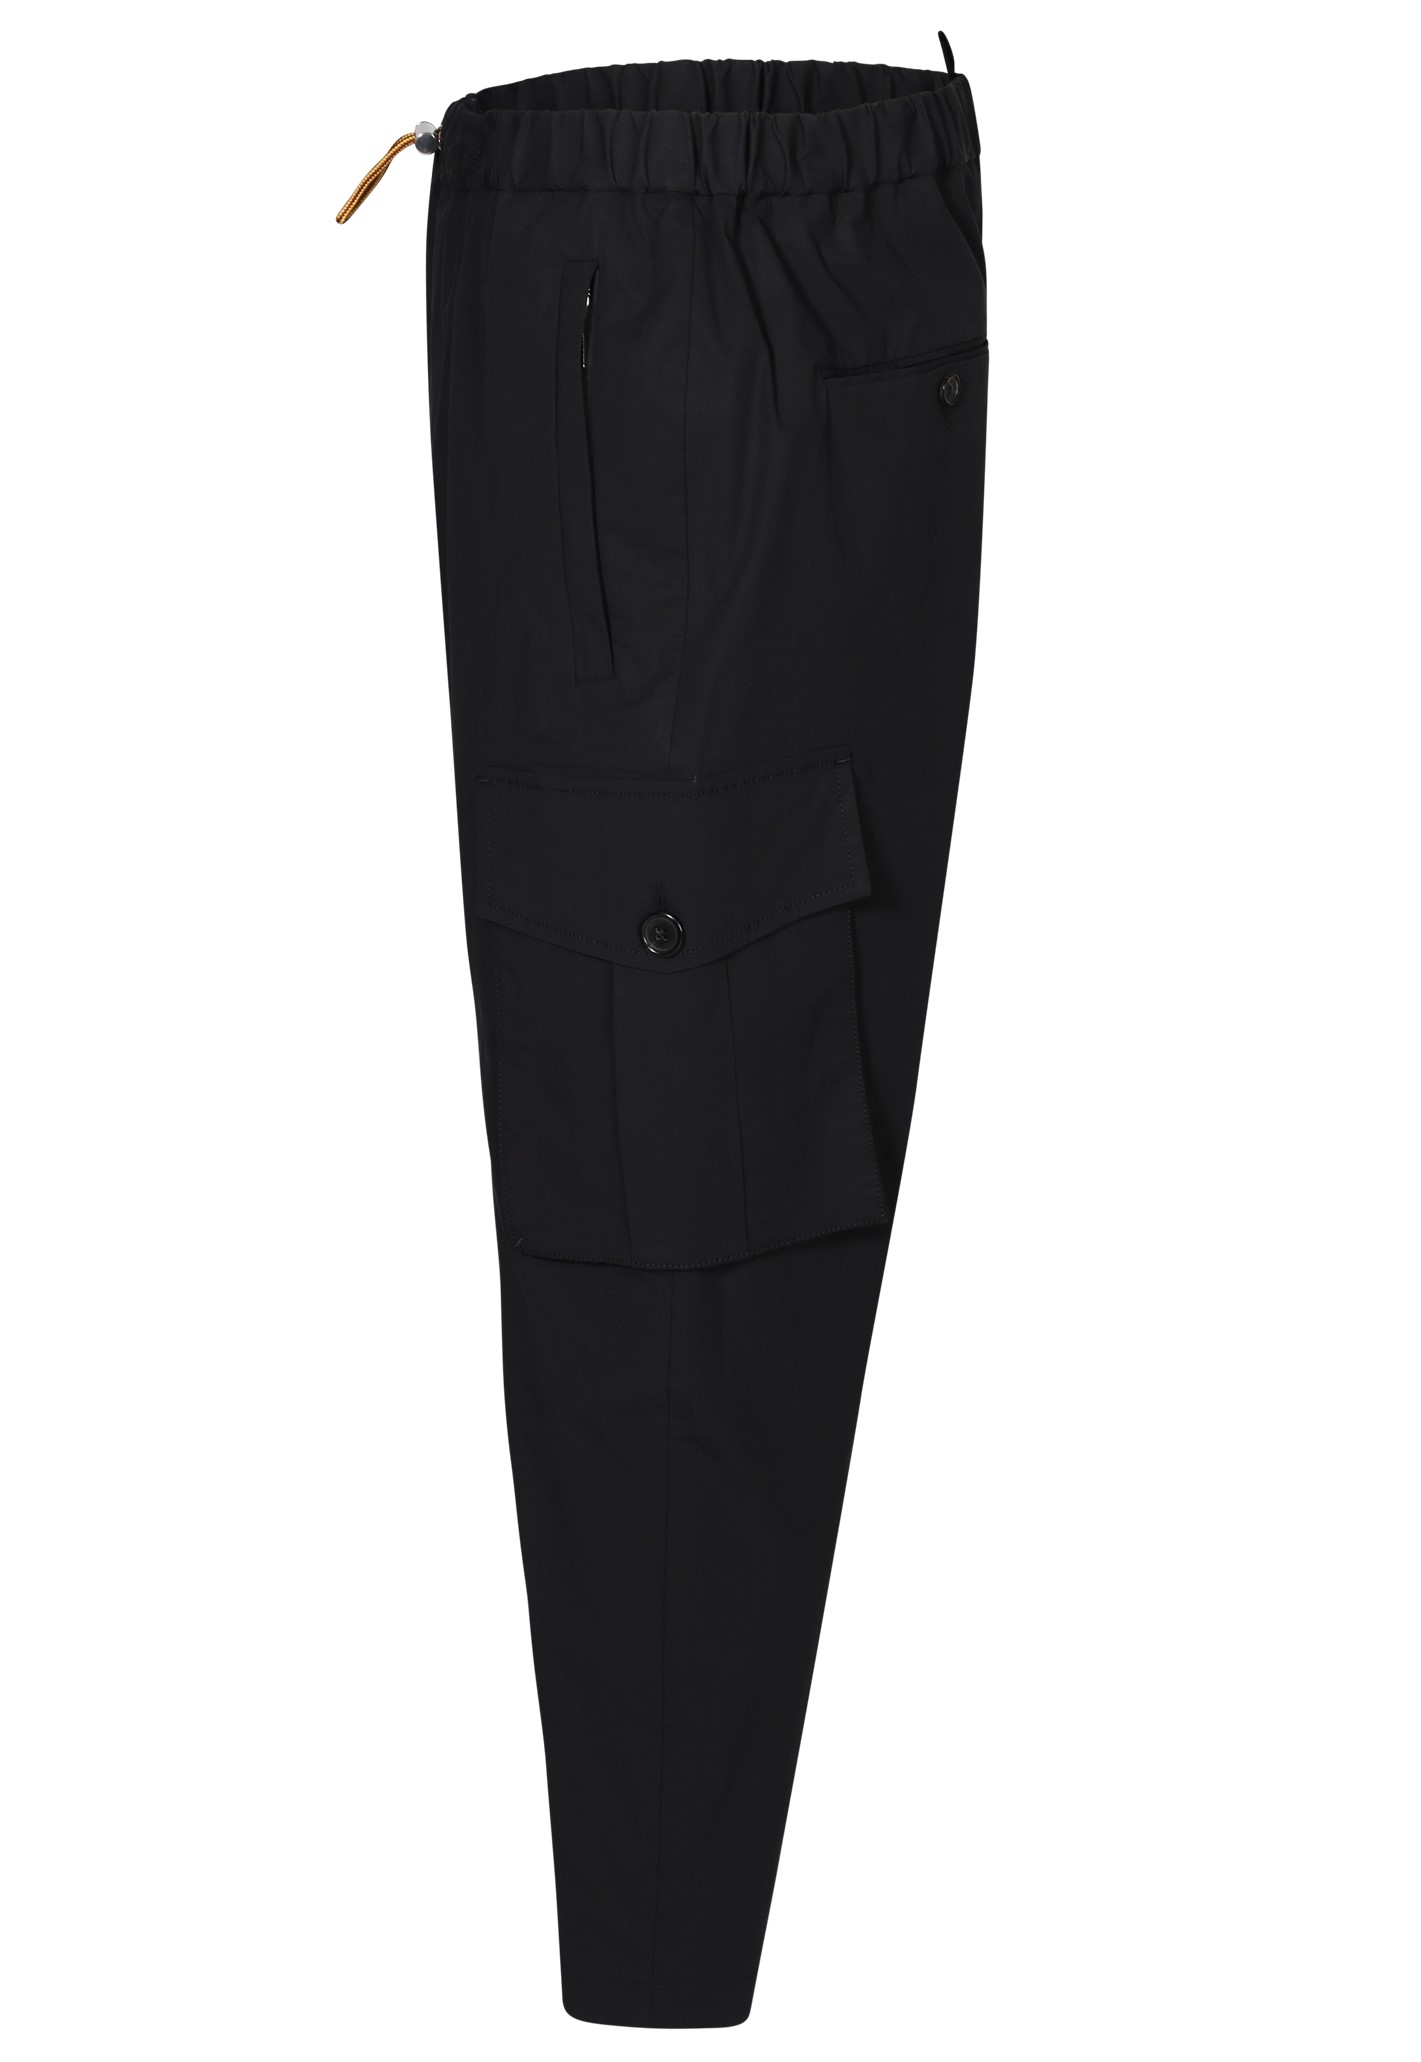 DSQUARED2 Pully Cargo Pant in Black 46